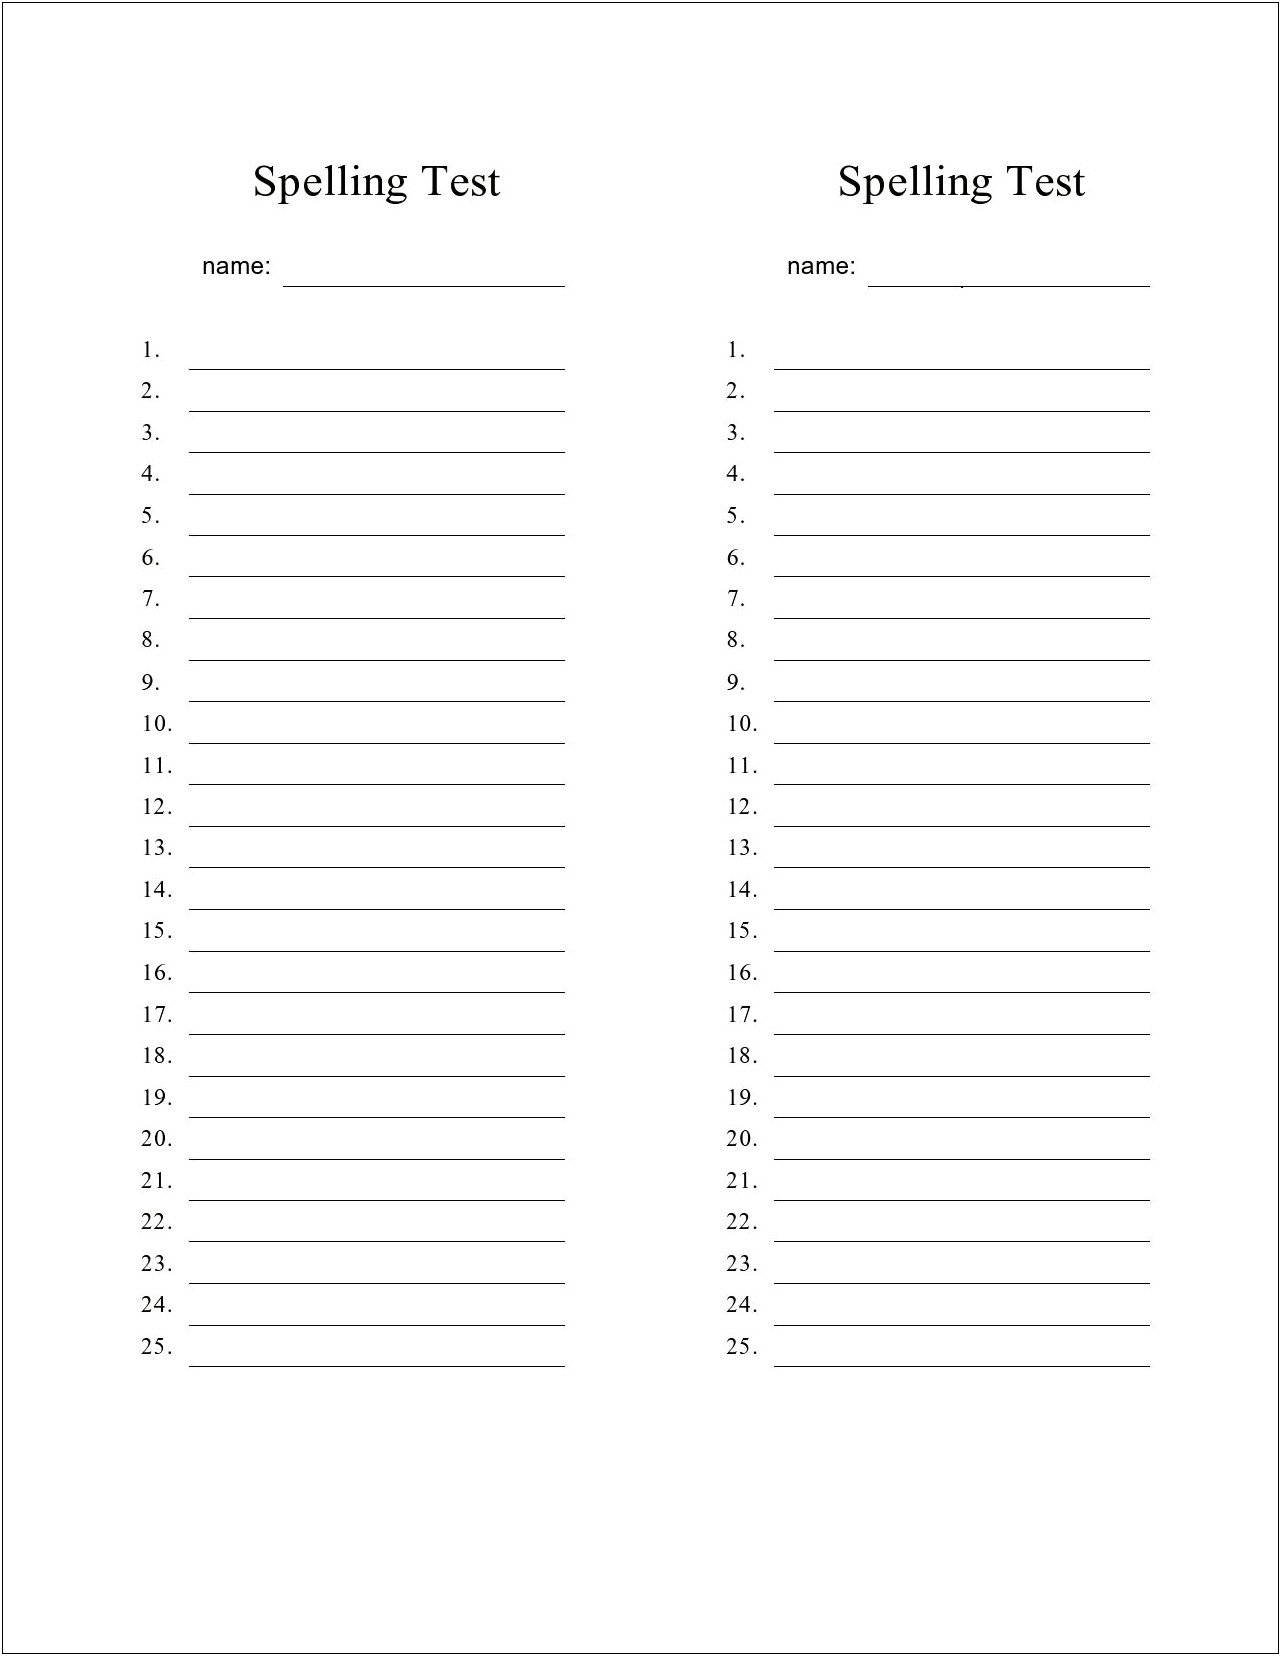 Free Spelling Test Template 12 Words